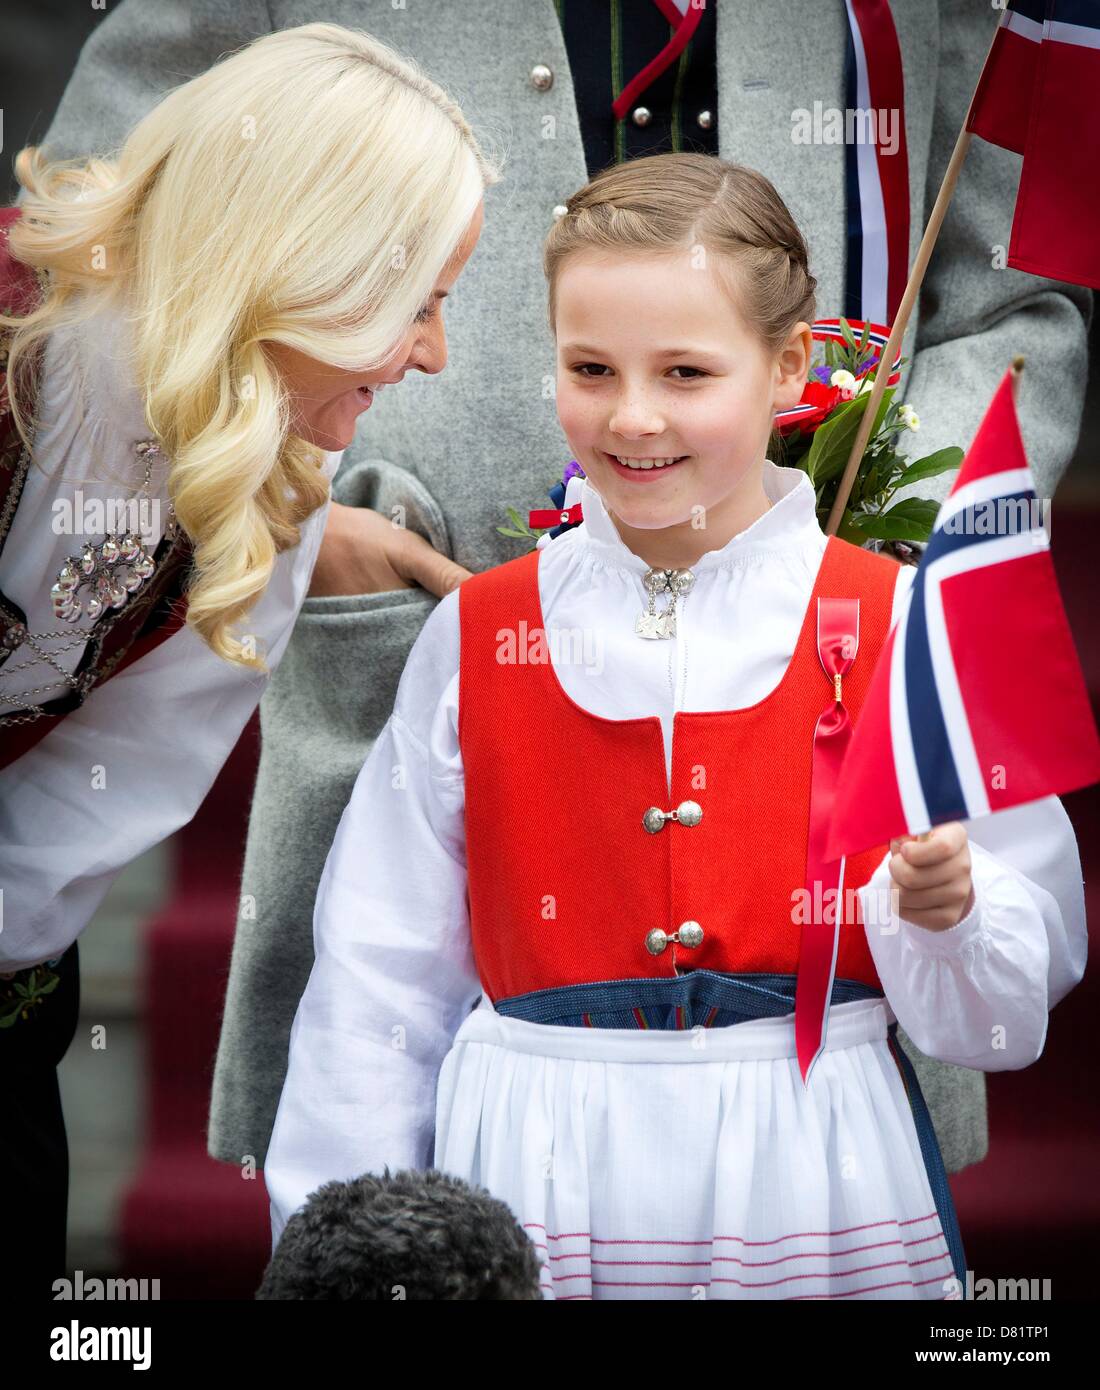 Crownprincess Mette-Marit and Princess Ingrid Alexandra of Norway celebrate the National Day at their residence in Skaugum, Norway, 17 May 2013. Photo: Patrick van Katwijk / NETHERLANDS AND FRANCE; OUT Stock Photo